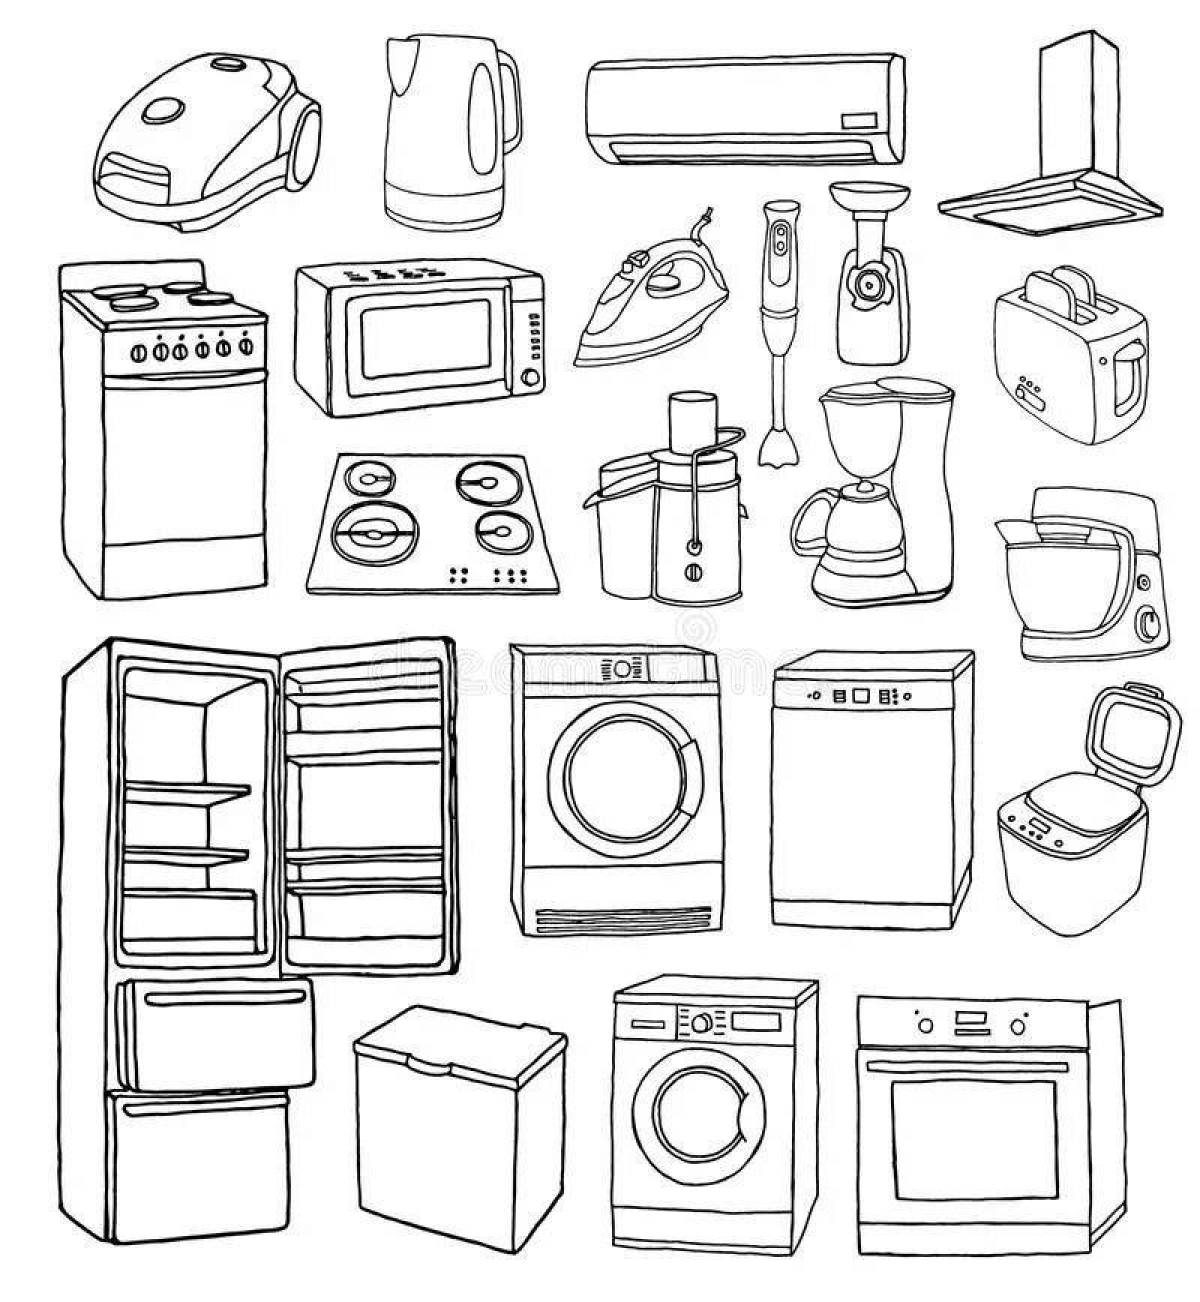 Fun coloring pages for household appliances for kids